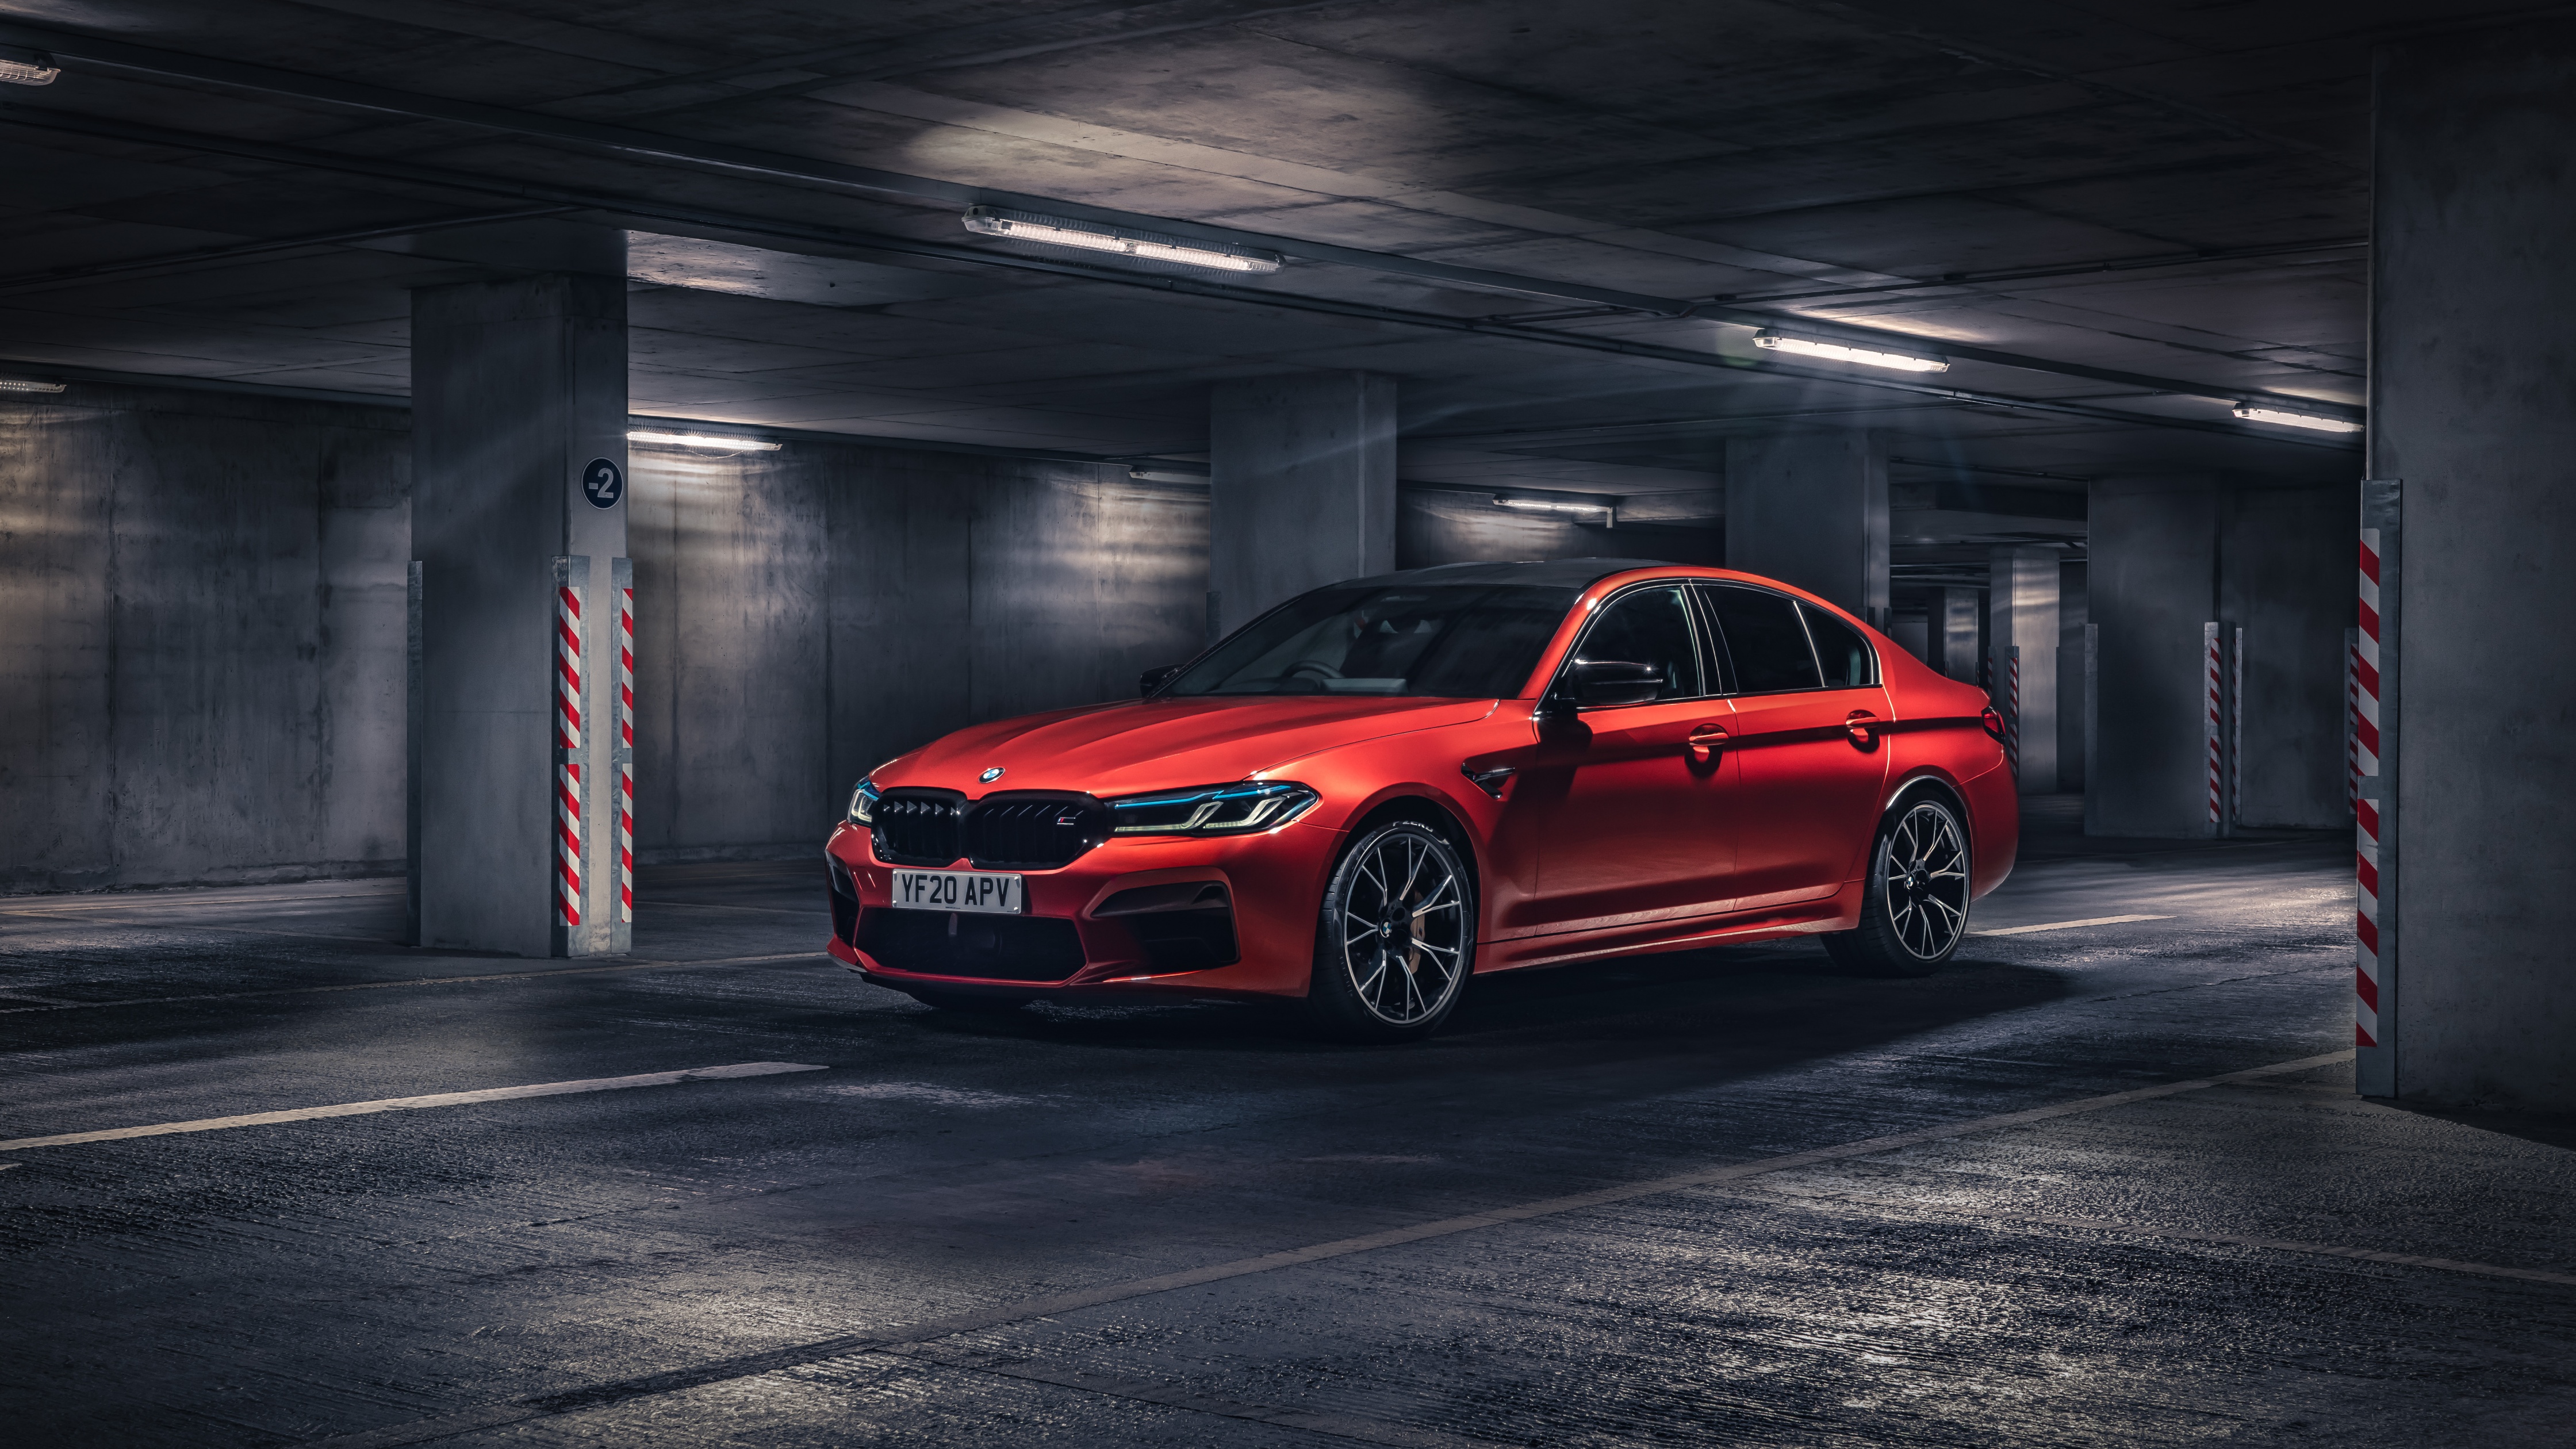 BMW M5 Competition Wallpaper 4K, 2020, 5K, Cars, #3045